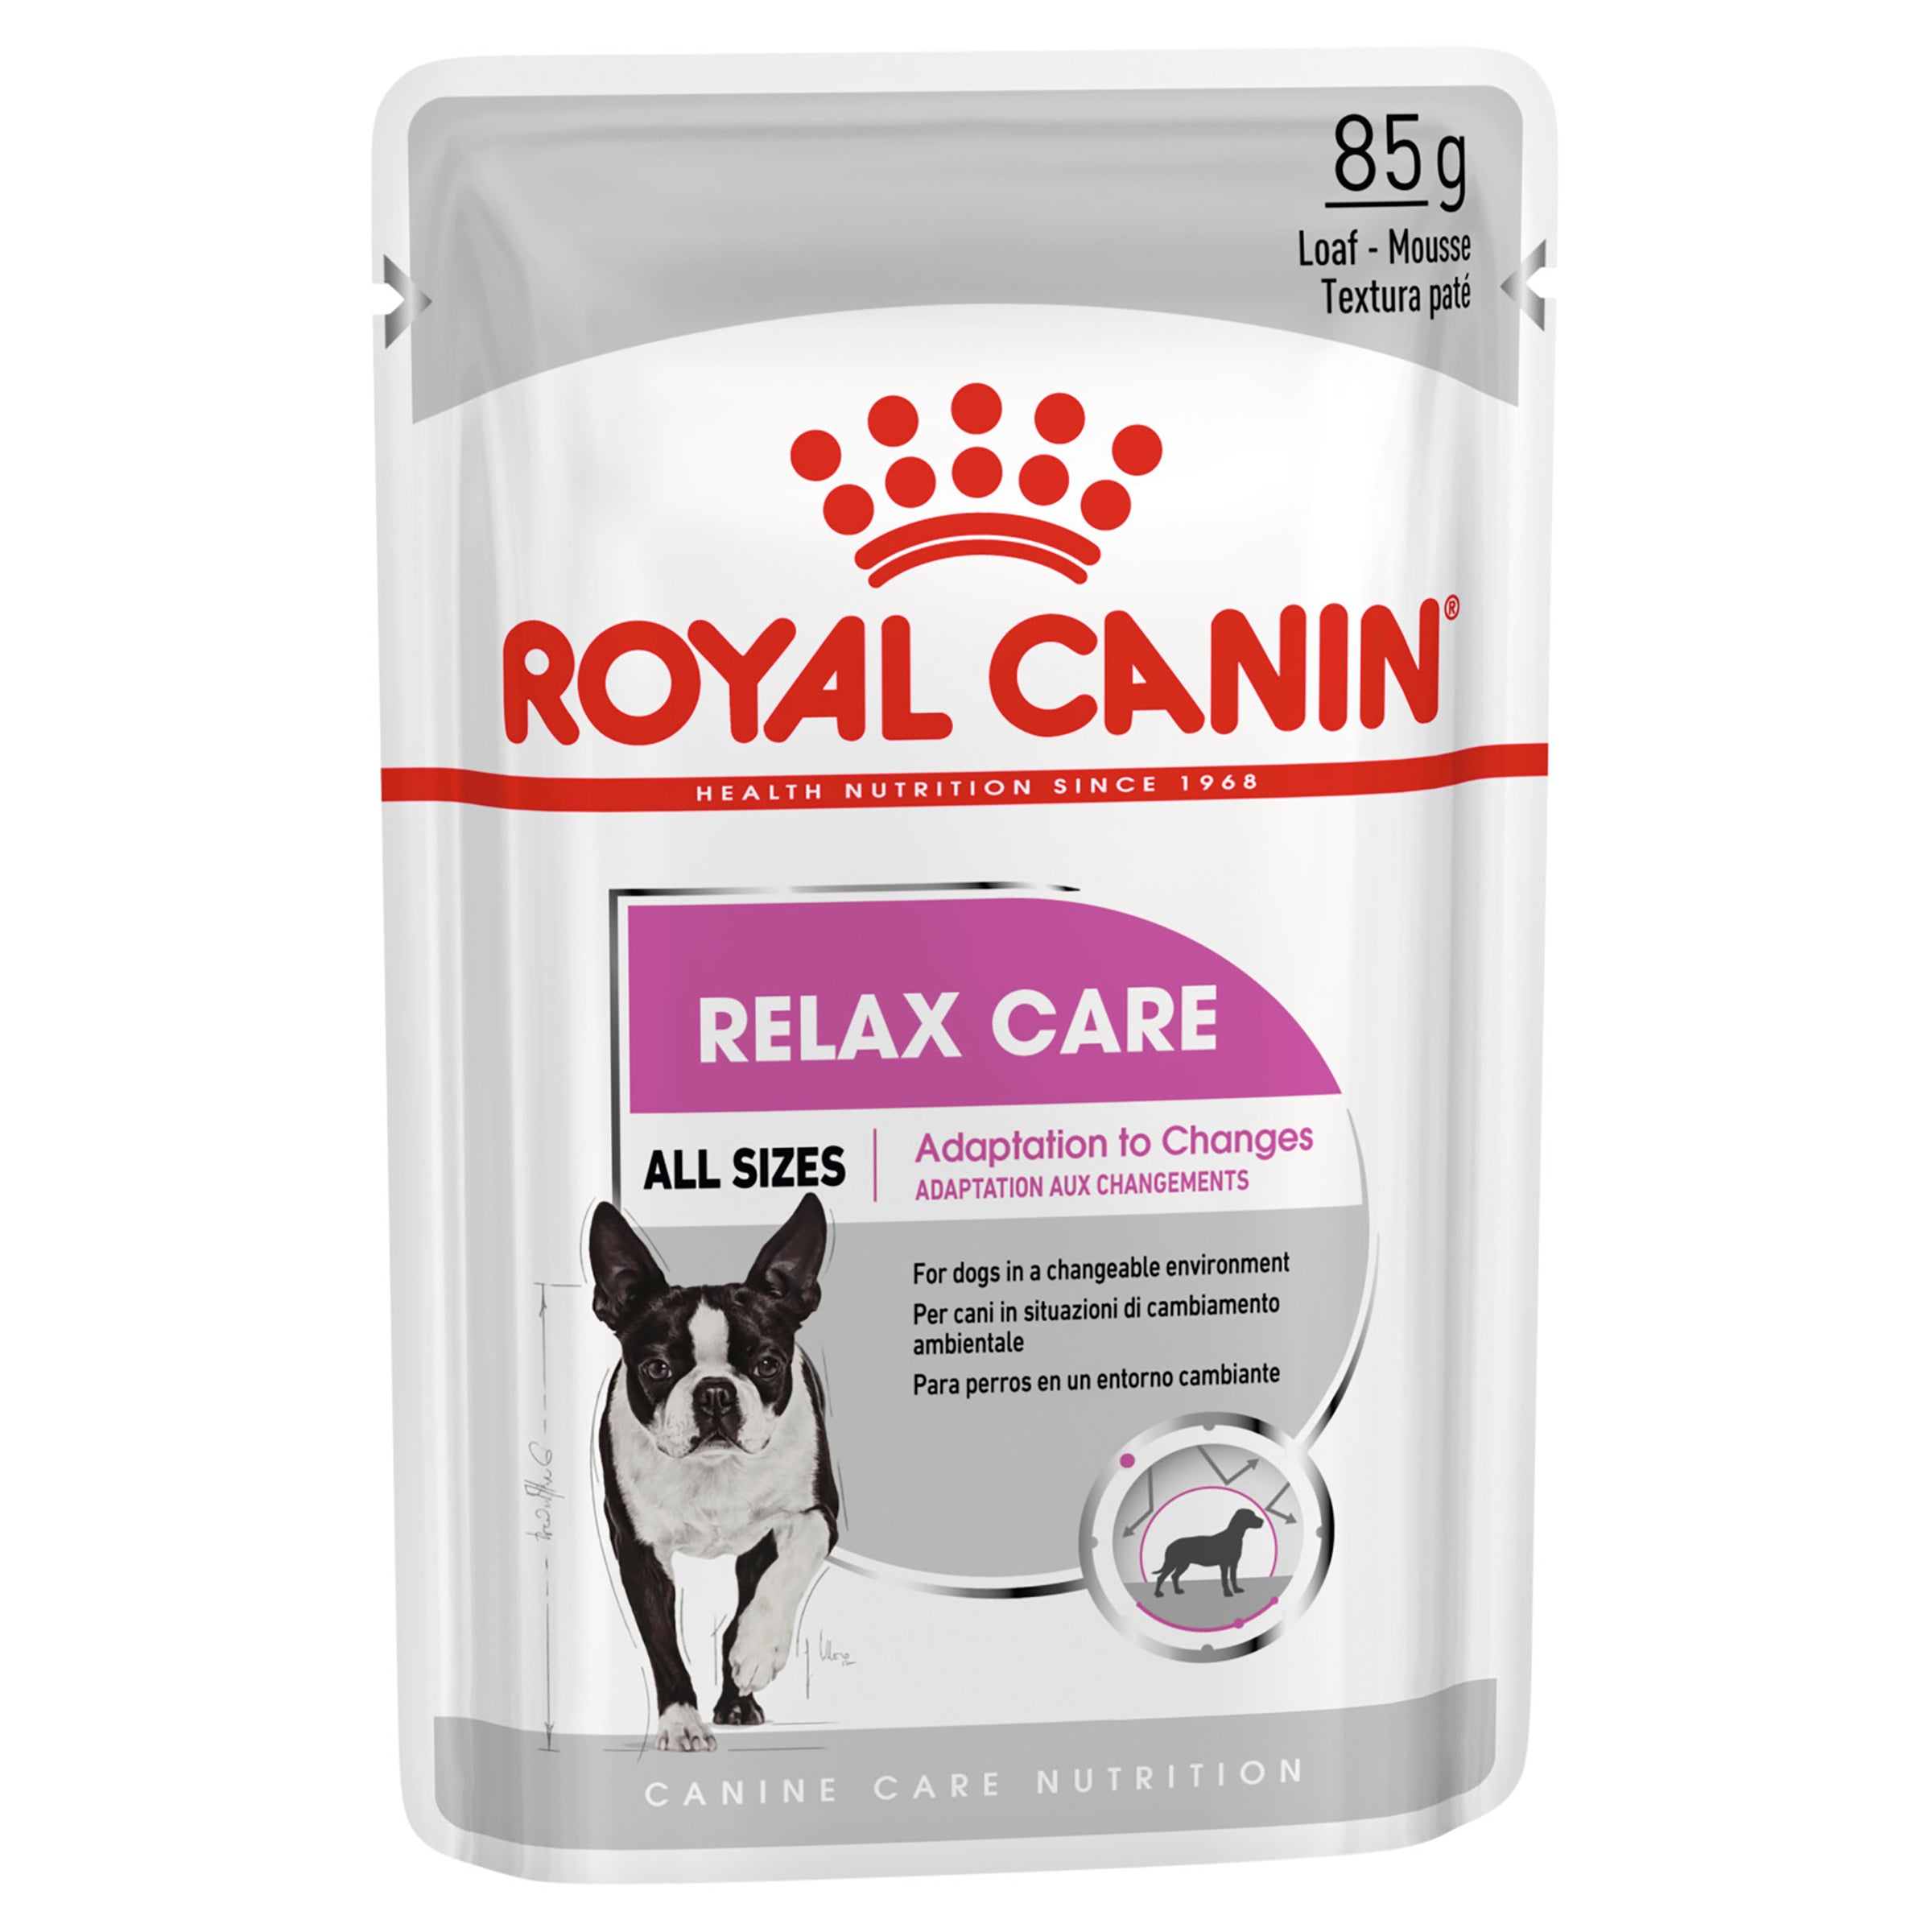 Royal Canin Relax Care Loaf 85g